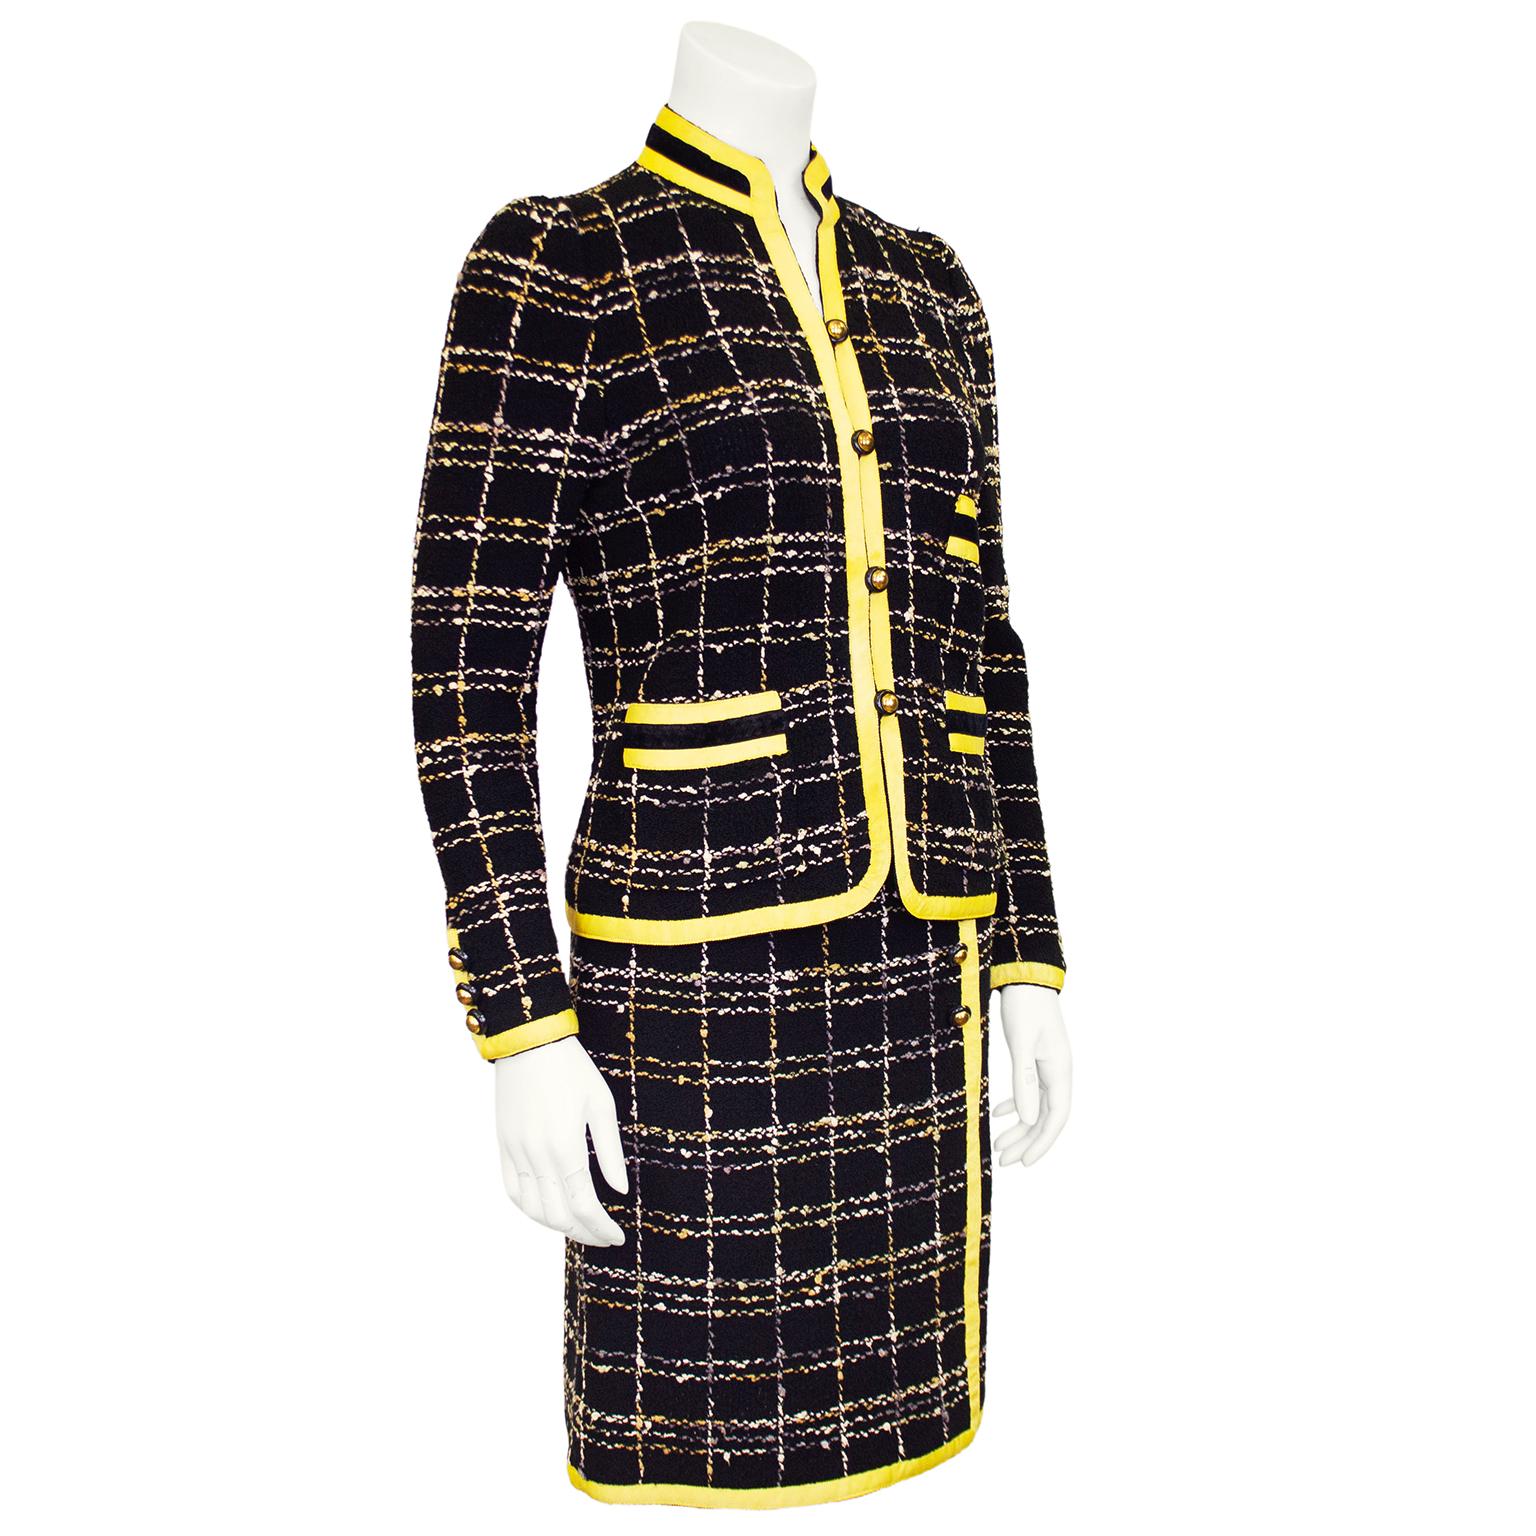 1980s Adolfo skirt suit. Black tweedy knit with grey, taupe and cream plaid and butter yellow grosgrain trim. Jacket features a Mandarin collar and horizontal slit pockets with yellow grosgrain and black velvet trim. Skirt is classic highwaisted